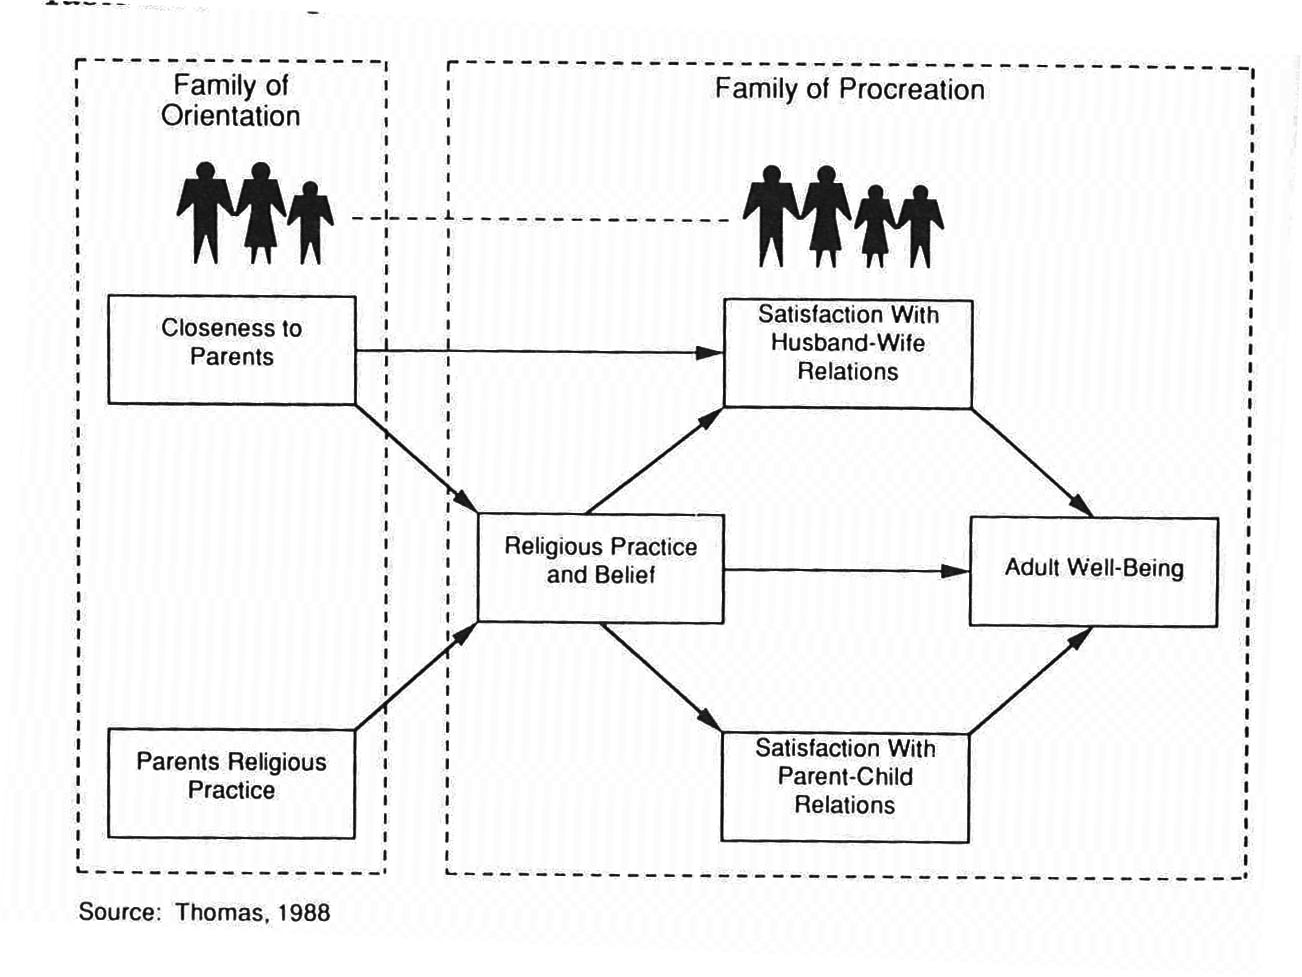 Religious Variables, Family Variables, and Well-Being